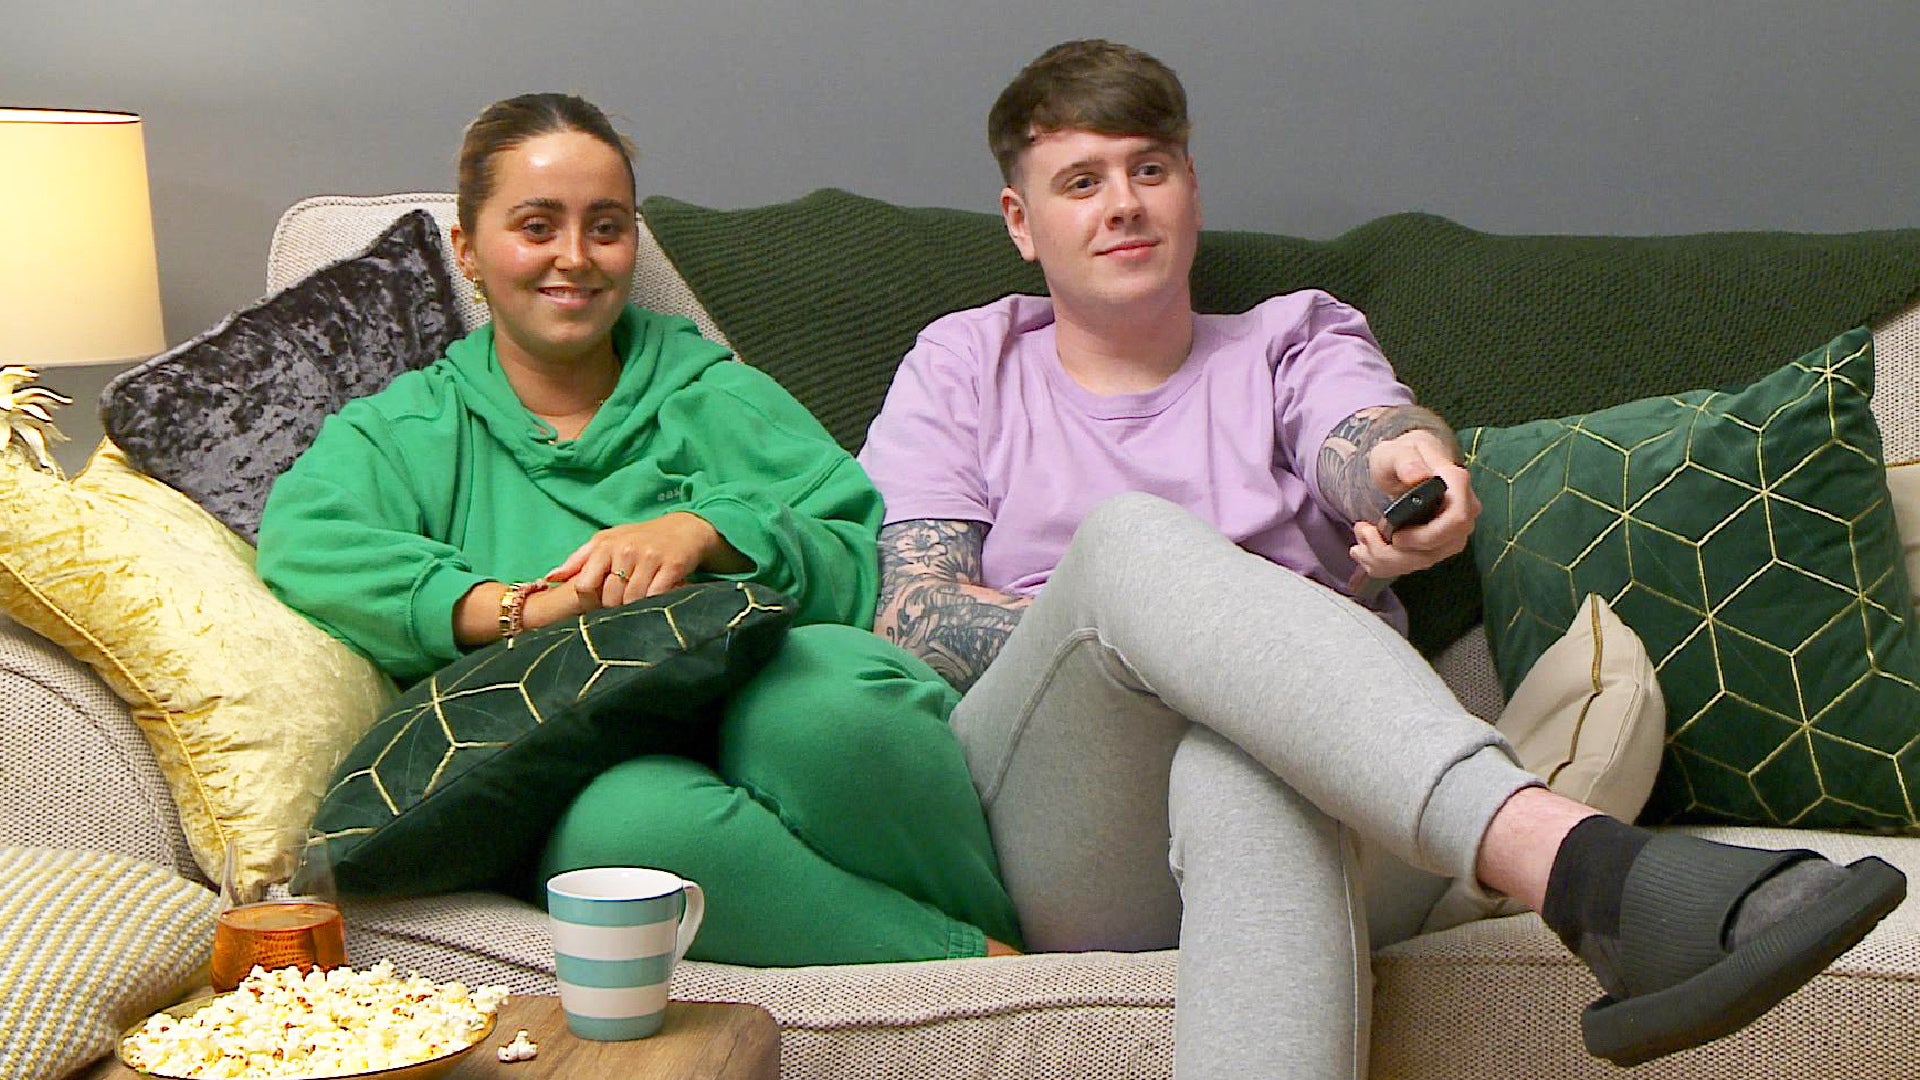 Friday’s episode of Gogglebox will also reflect the week’s events (Channel4/Studio Lambert/PA)